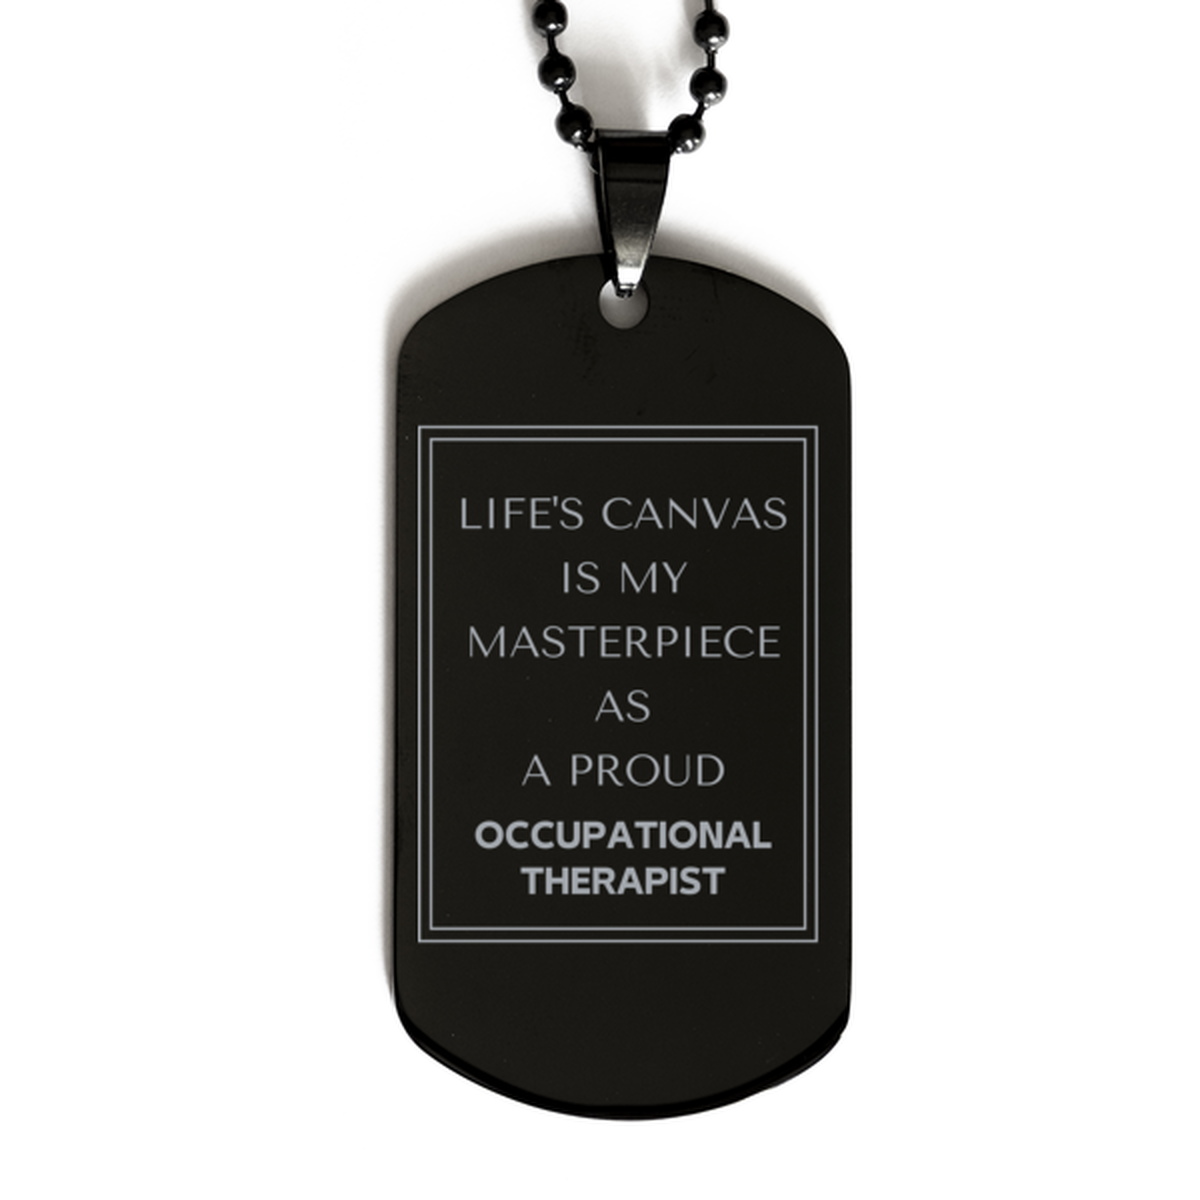 Proud Occupational Therapist Gifts, Life's canvas is my masterpiece, Epic Birthday Christmas Unique Black Dog Tag For Occupational Therapist, Coworkers, Men, Women, Friends